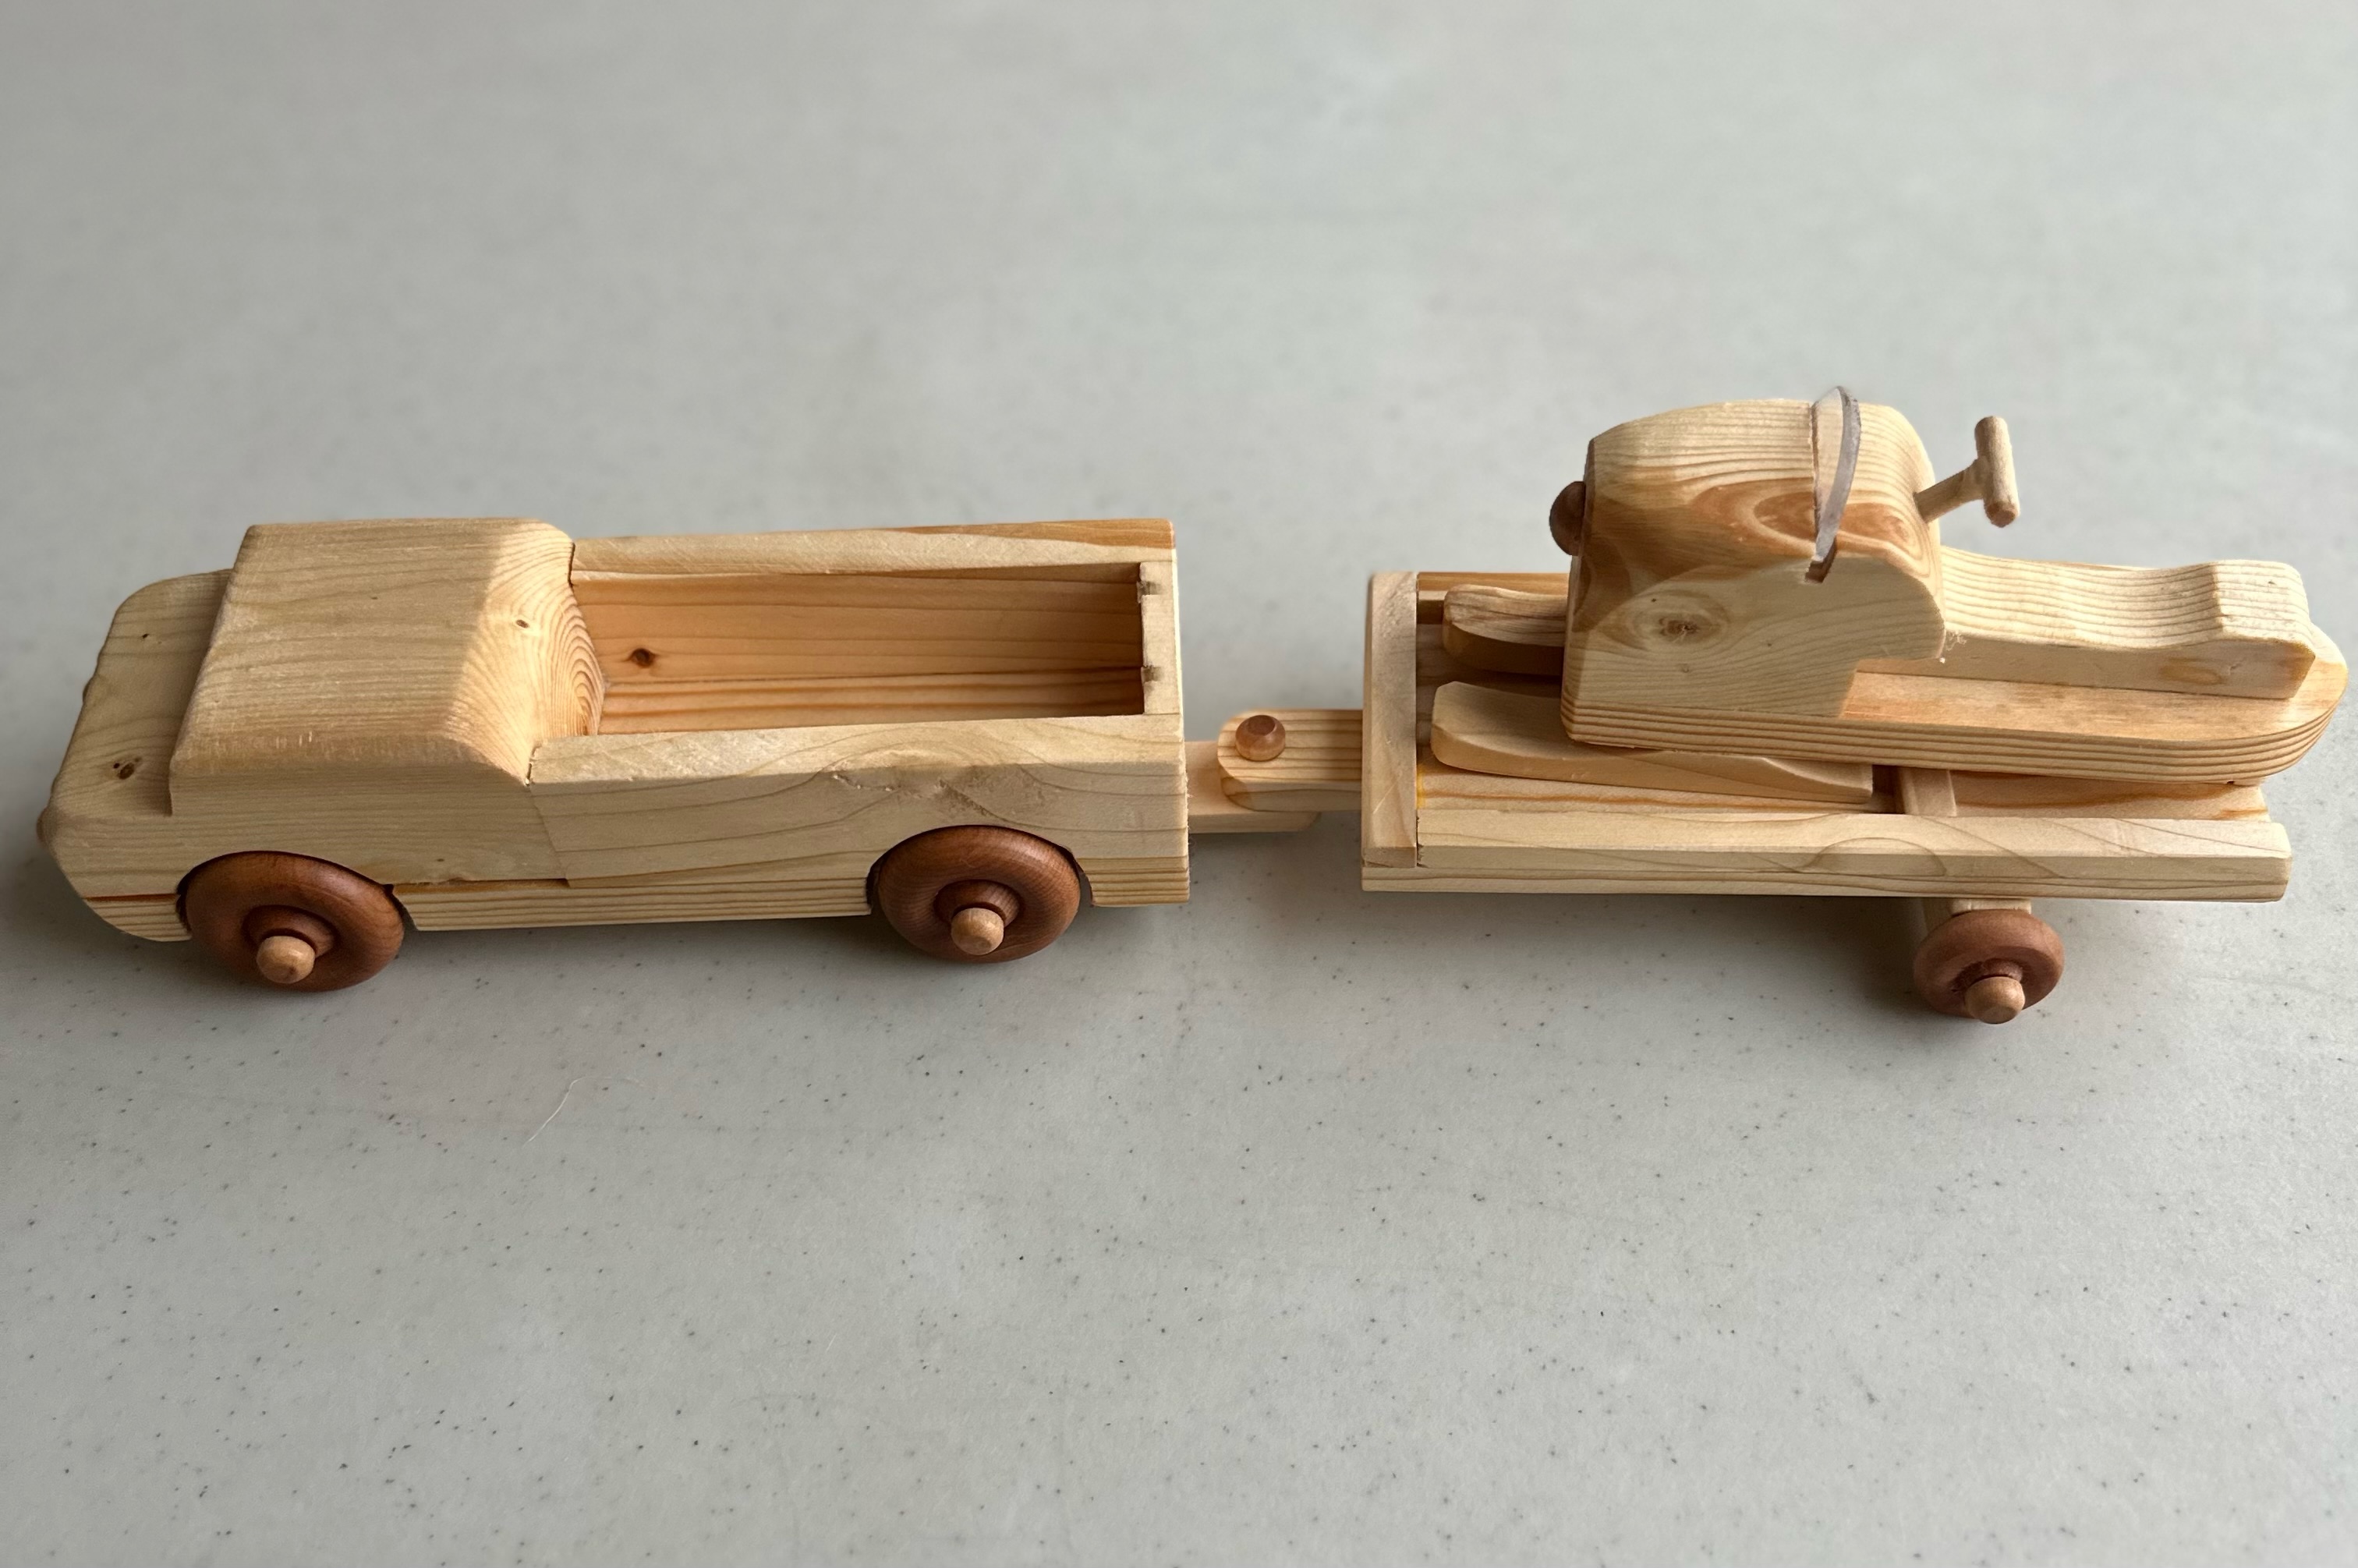 Finished Wooden Toy with Truck, Trailer and Snowmobile